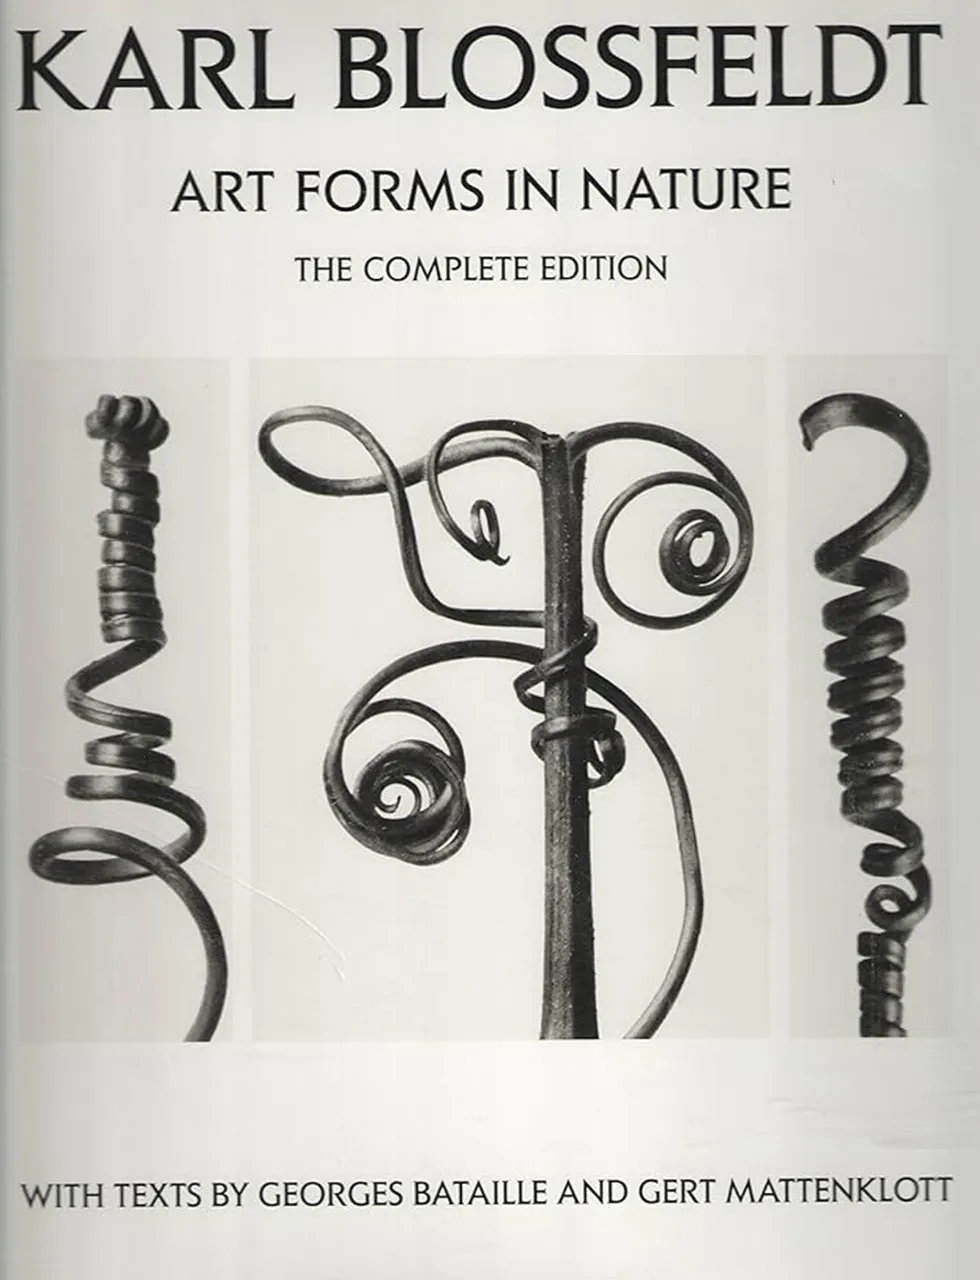 art forms in nature is an iconic book that stands the test of time, classic inspiration for katharine pooley